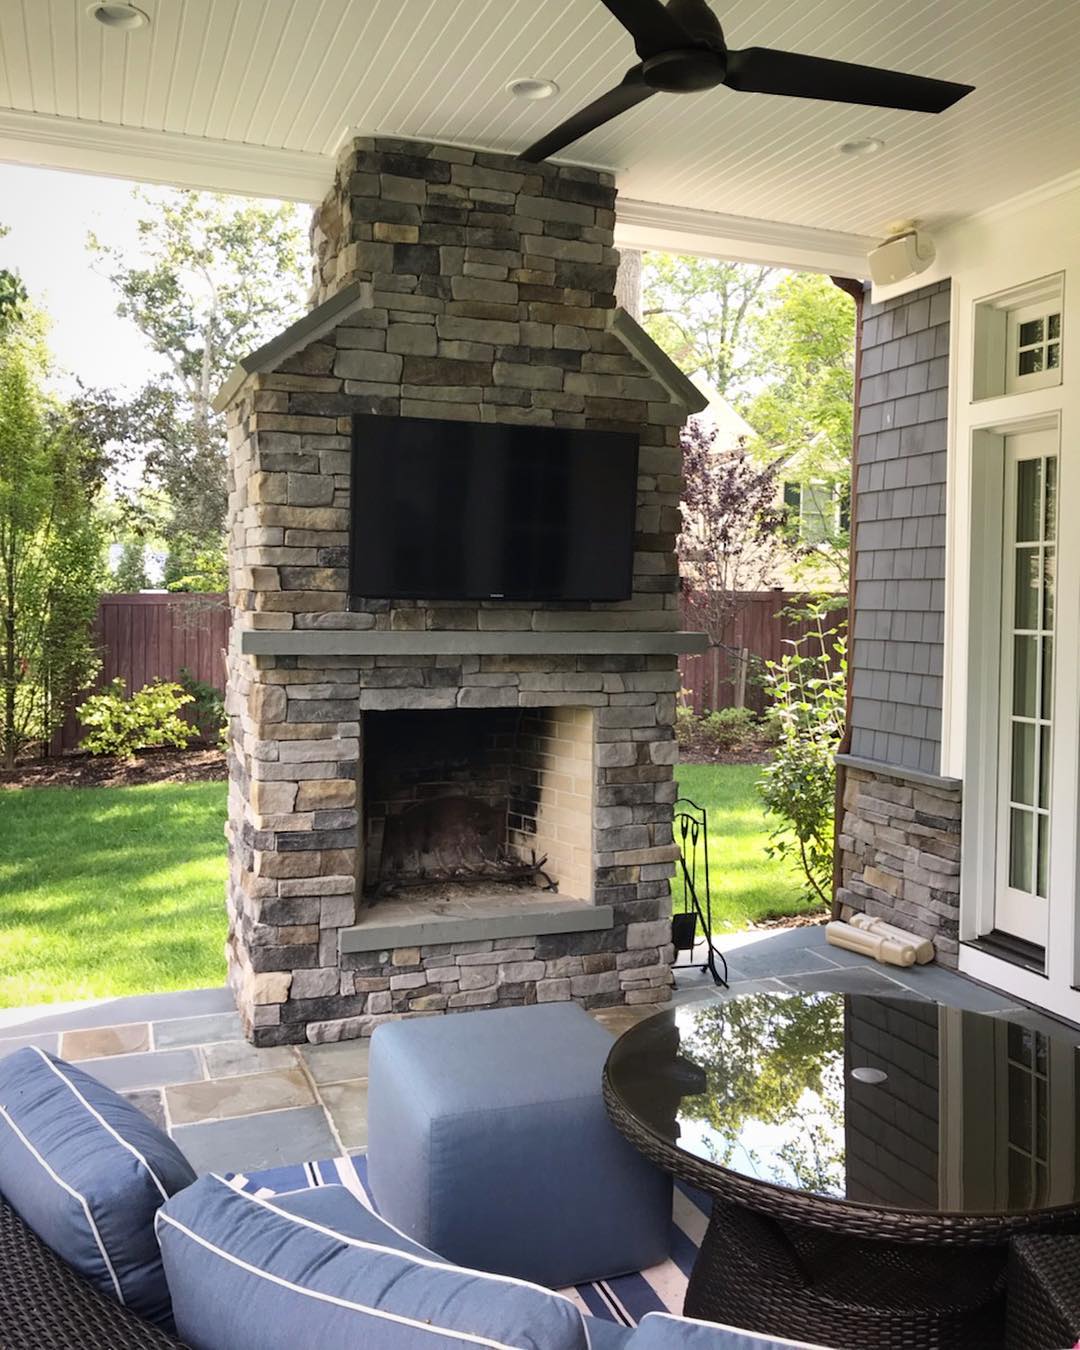 outdoor TV hanging from backyard fireplace with seating nearby photo by Instagram user @professional.audio.consultants